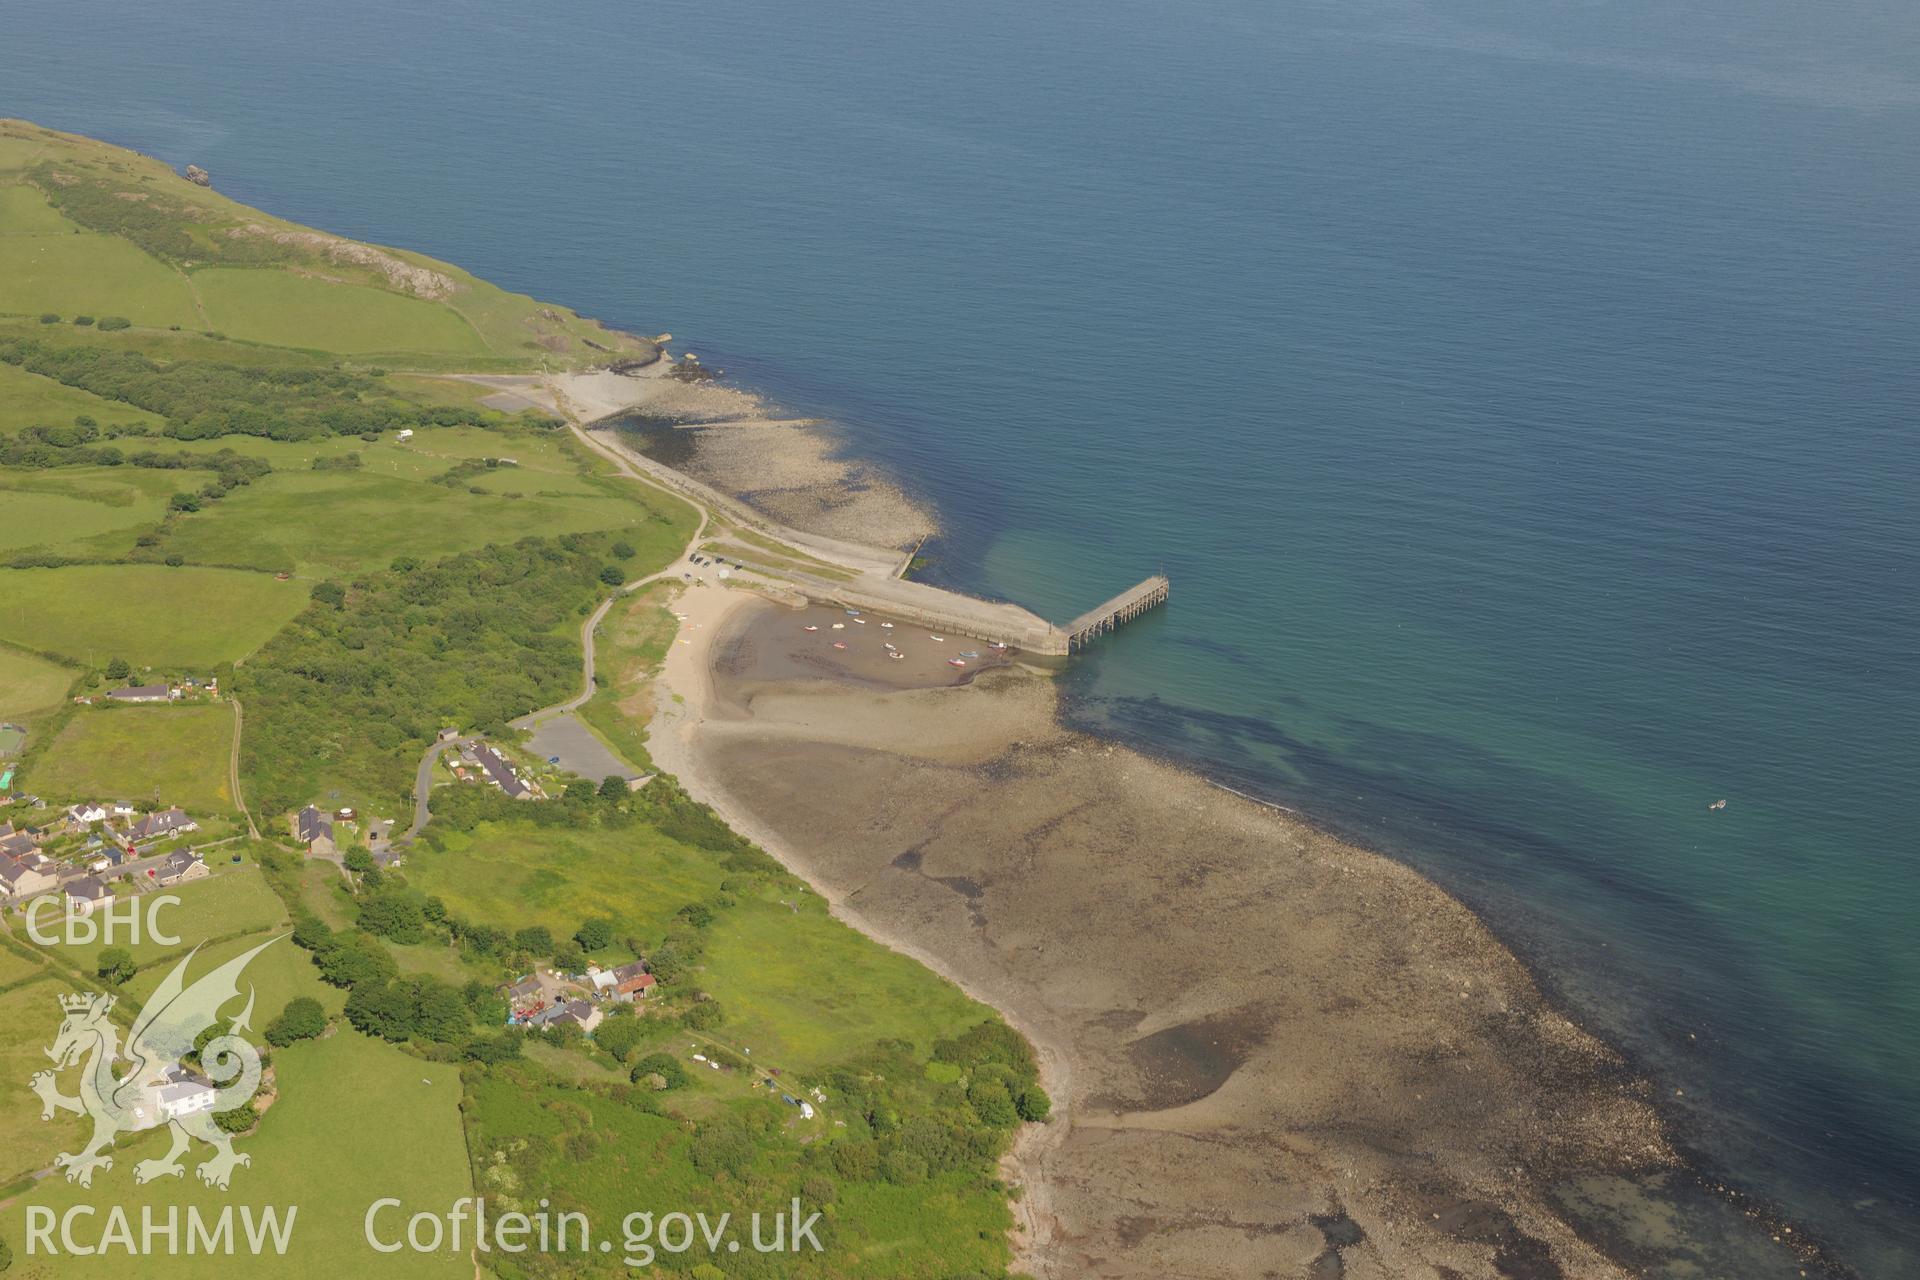 Trevor Pier and its wooden extension, Caernarfon Bay. Oblique aerial photograph taken during the Royal Commission's programme of archaeological aerial reconnaissance by Toby Driver on 23rd June 2015.